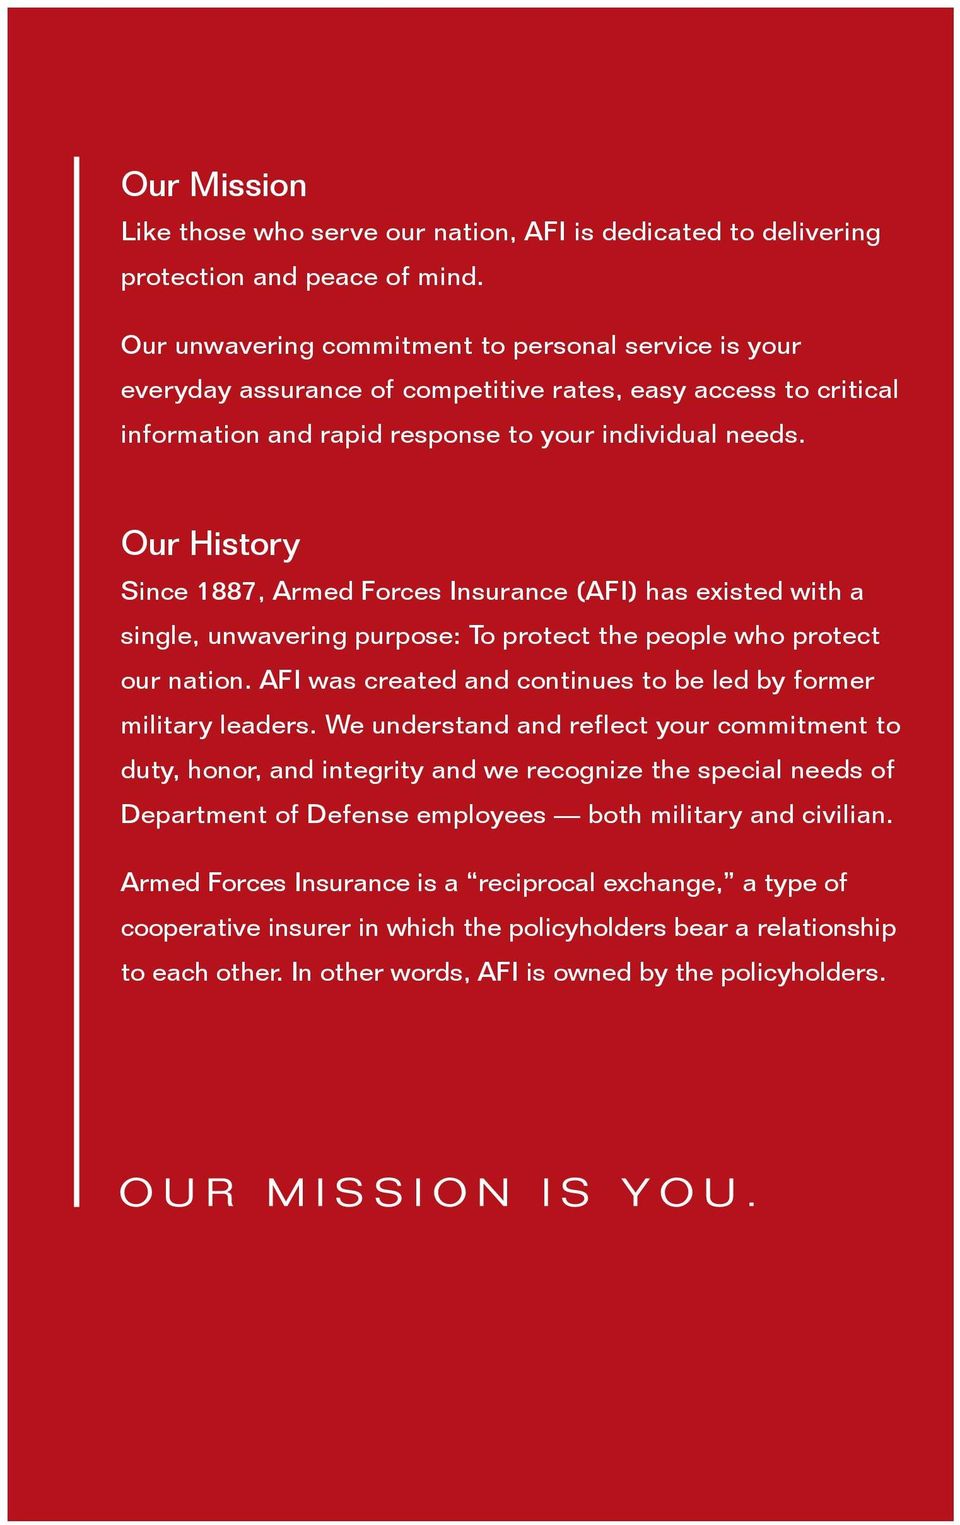 Our History Since 1887, Armed Forces Insurance (AFI) has existed with a single, unwavering purpose: To protect the people who protect our nation.